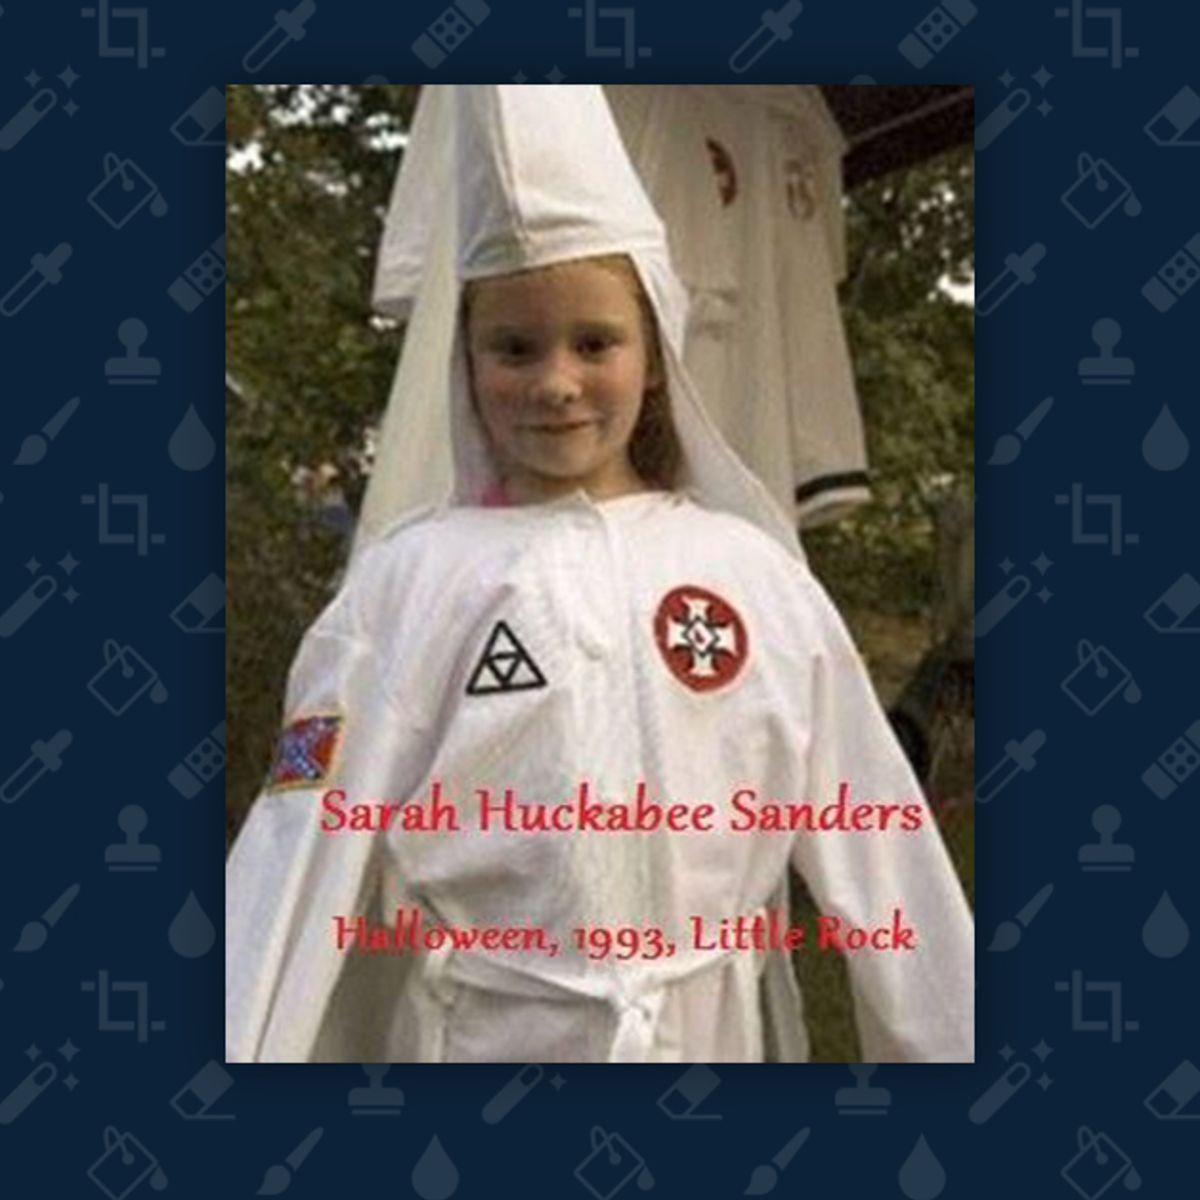 Man shows up at Halloween party in KKK robe, hood